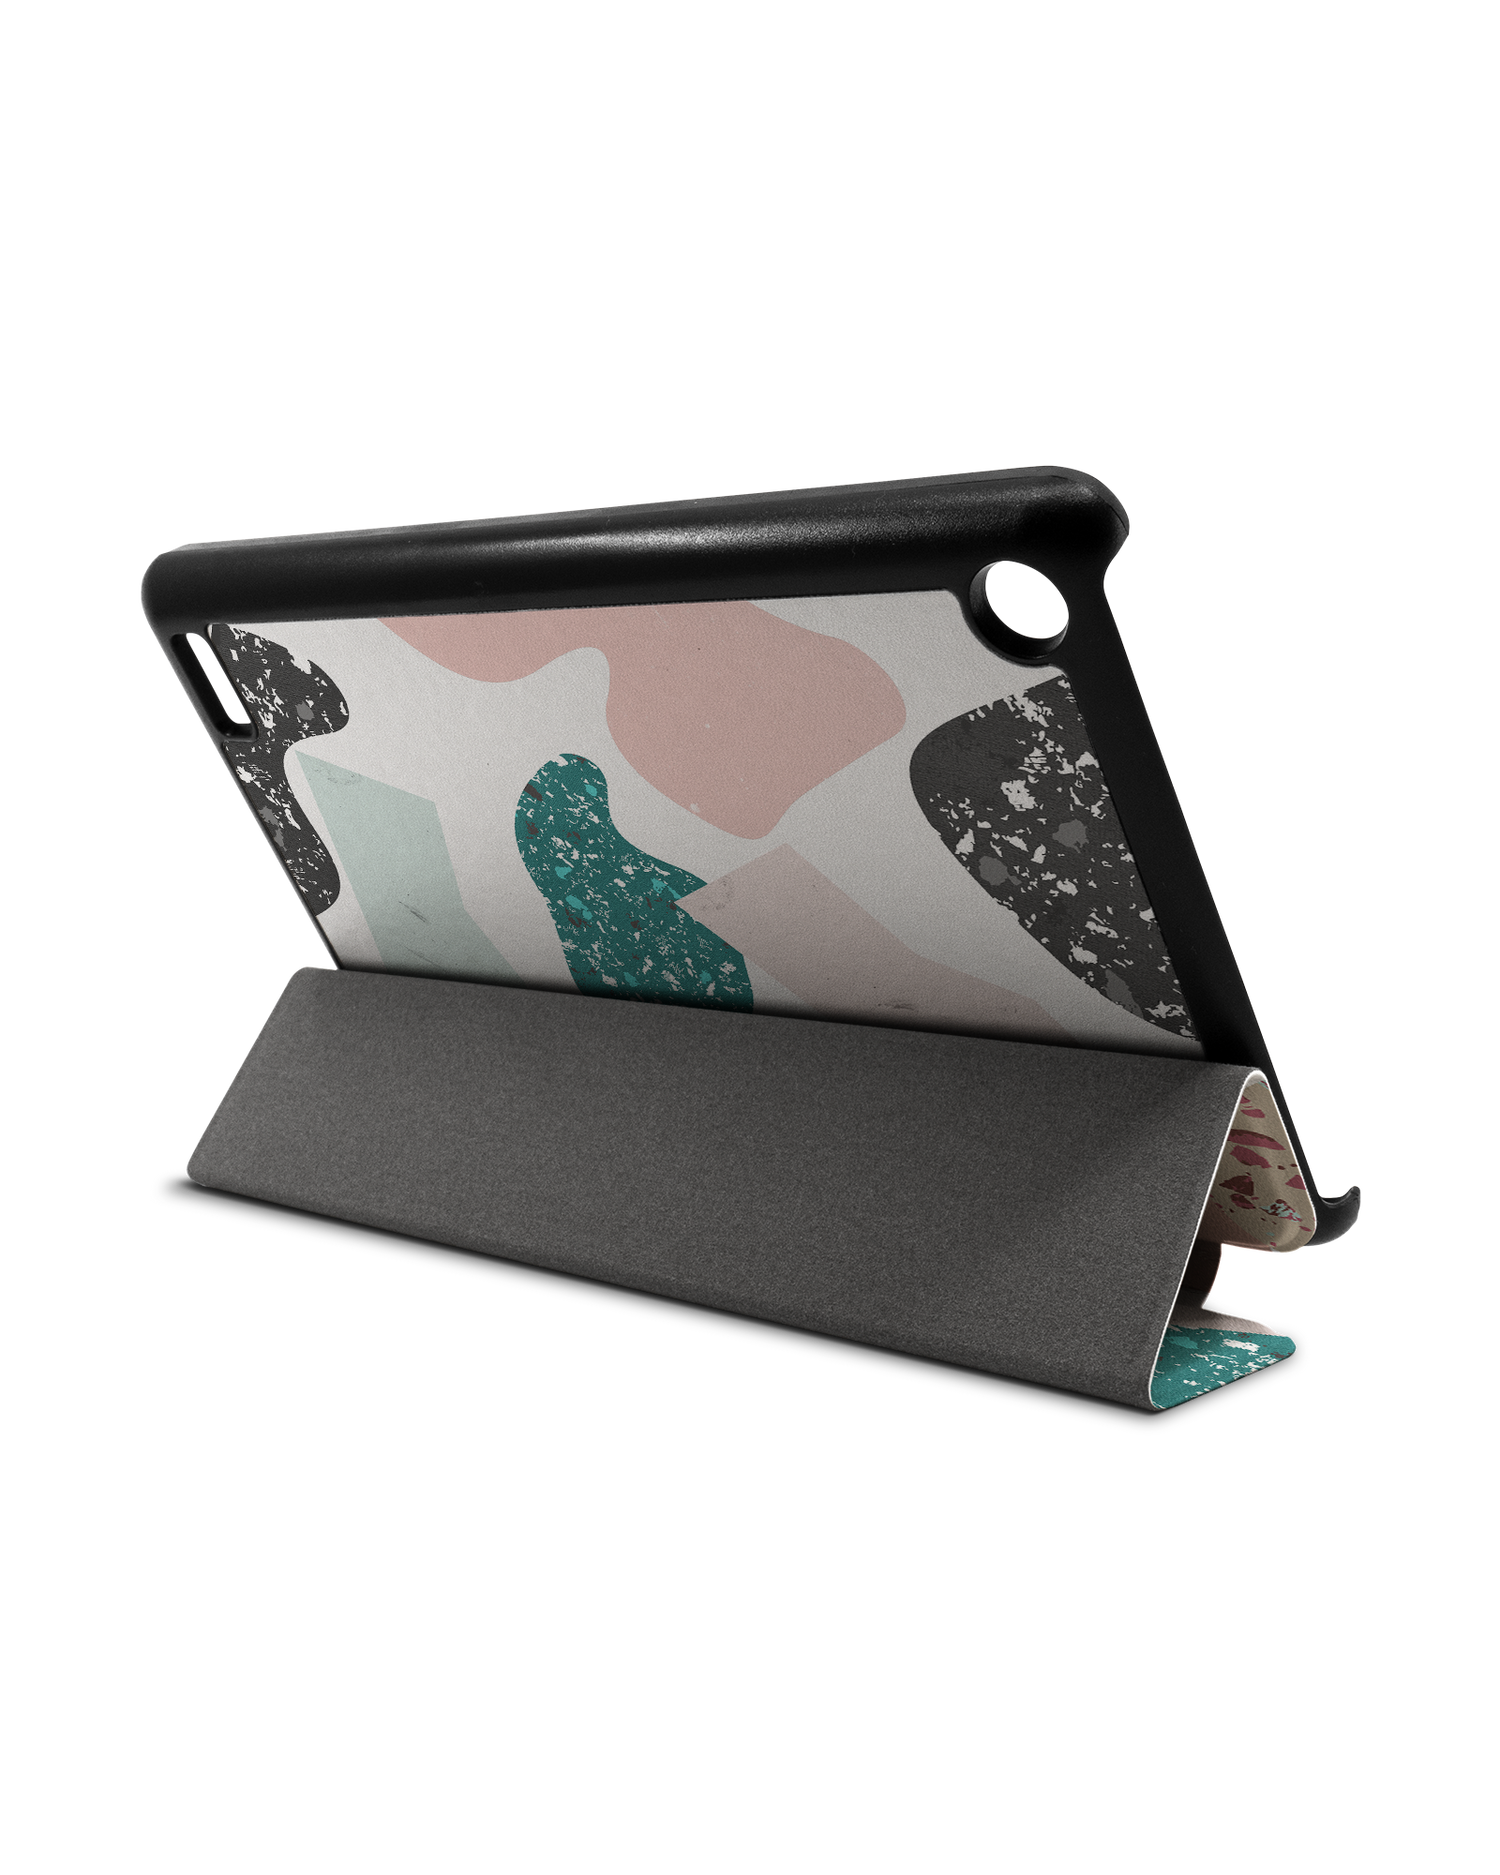 Scattered Shapes Tablet Smart Case for Amazon Fire 7: Used as Stand